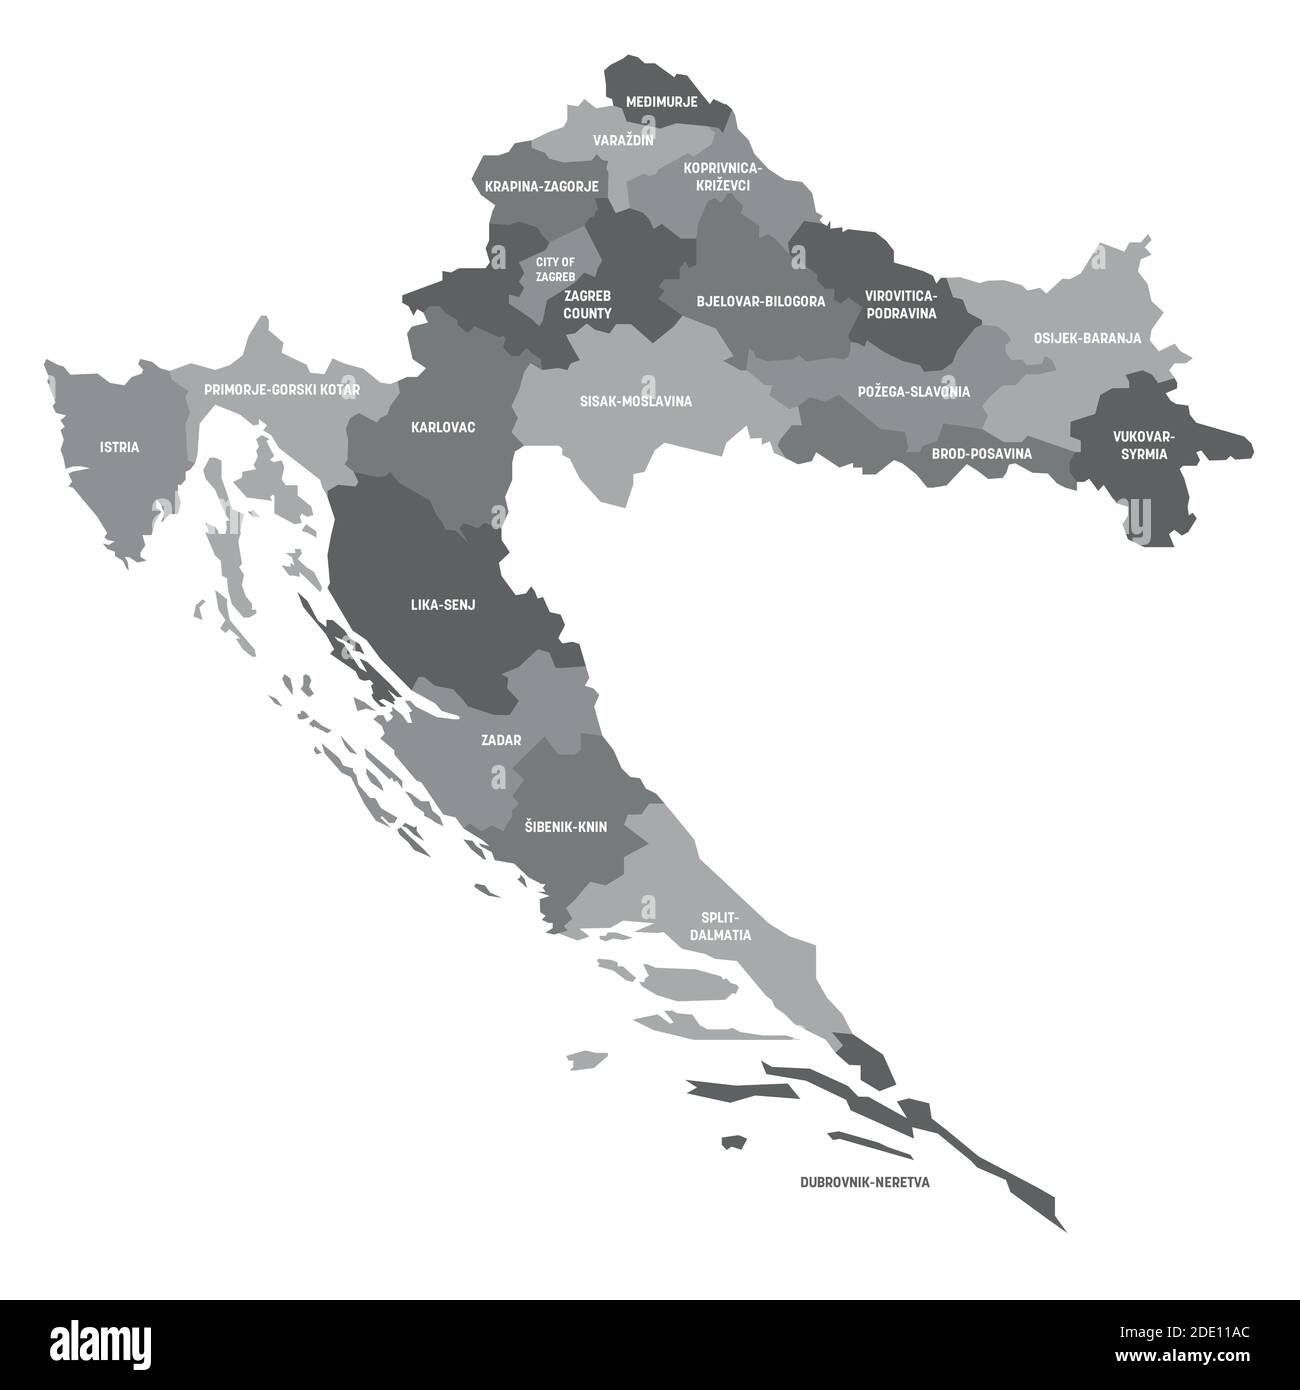 Gray political map of Croatia. Administrative divisions - counties. Simple flat vector map with labels. Stock Vector